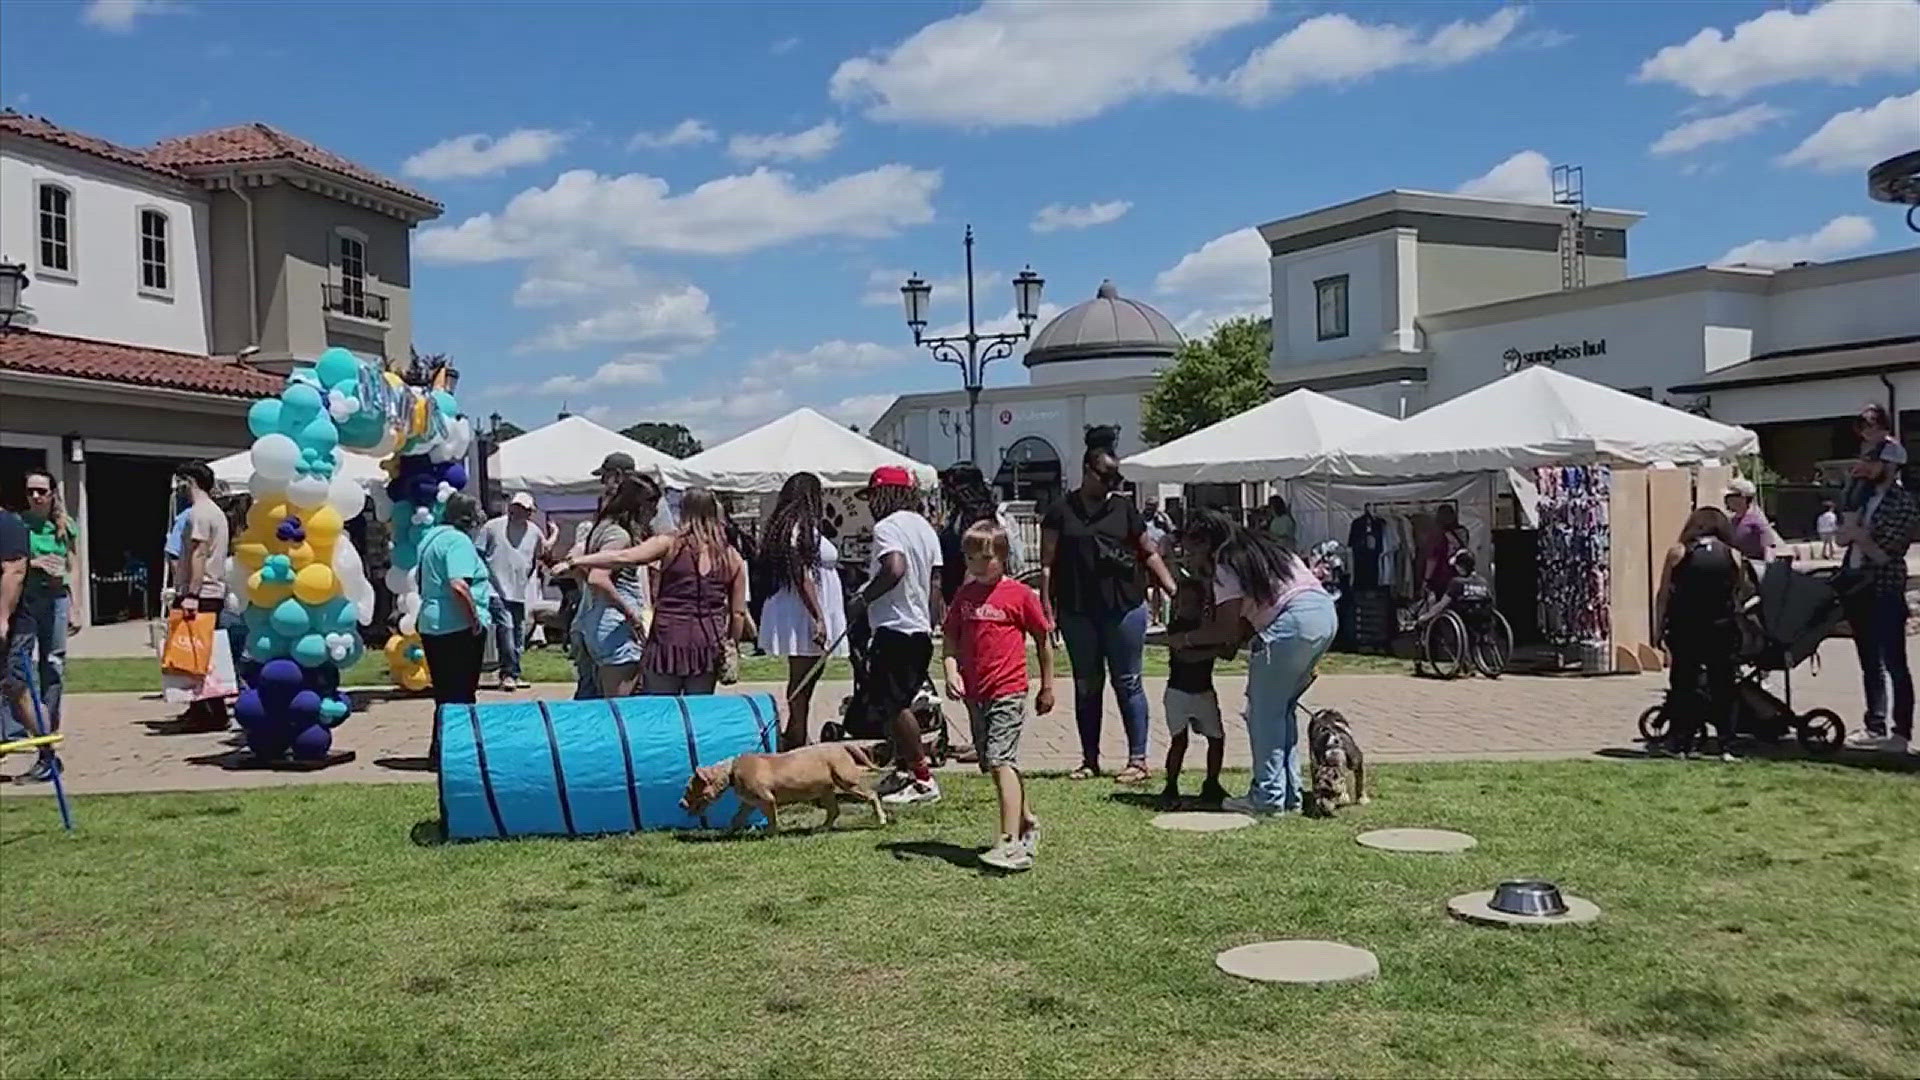 Saturday was chock-full of activities including a dog-friendly vendor event at Bridge Street and a live music smorgasbord in MidCity.